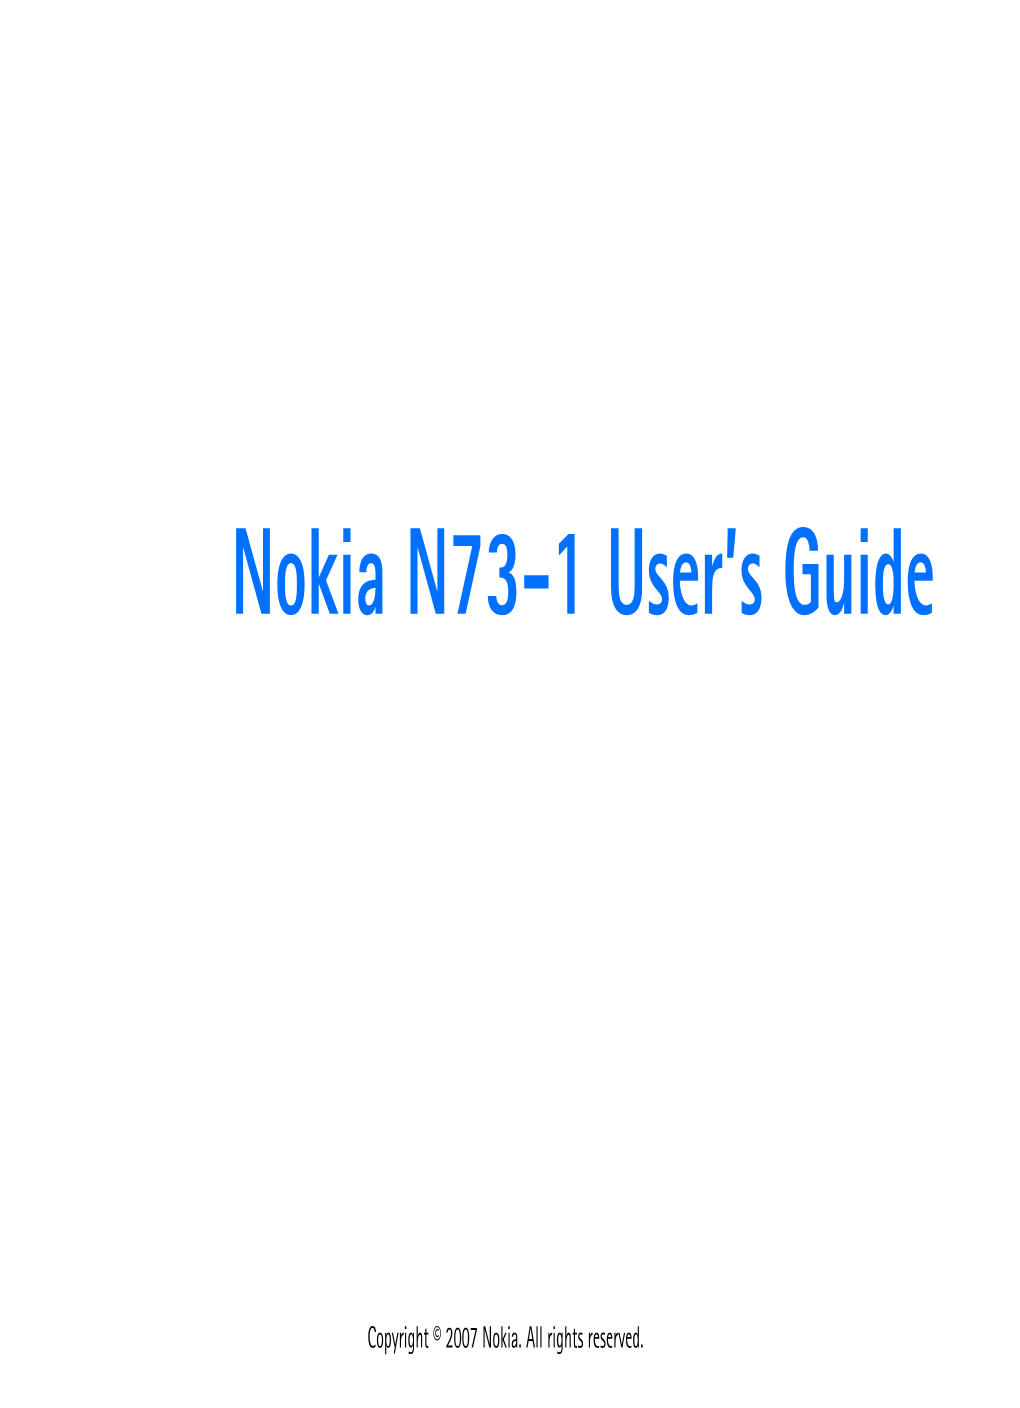 Nokia N73-1 User's Guide